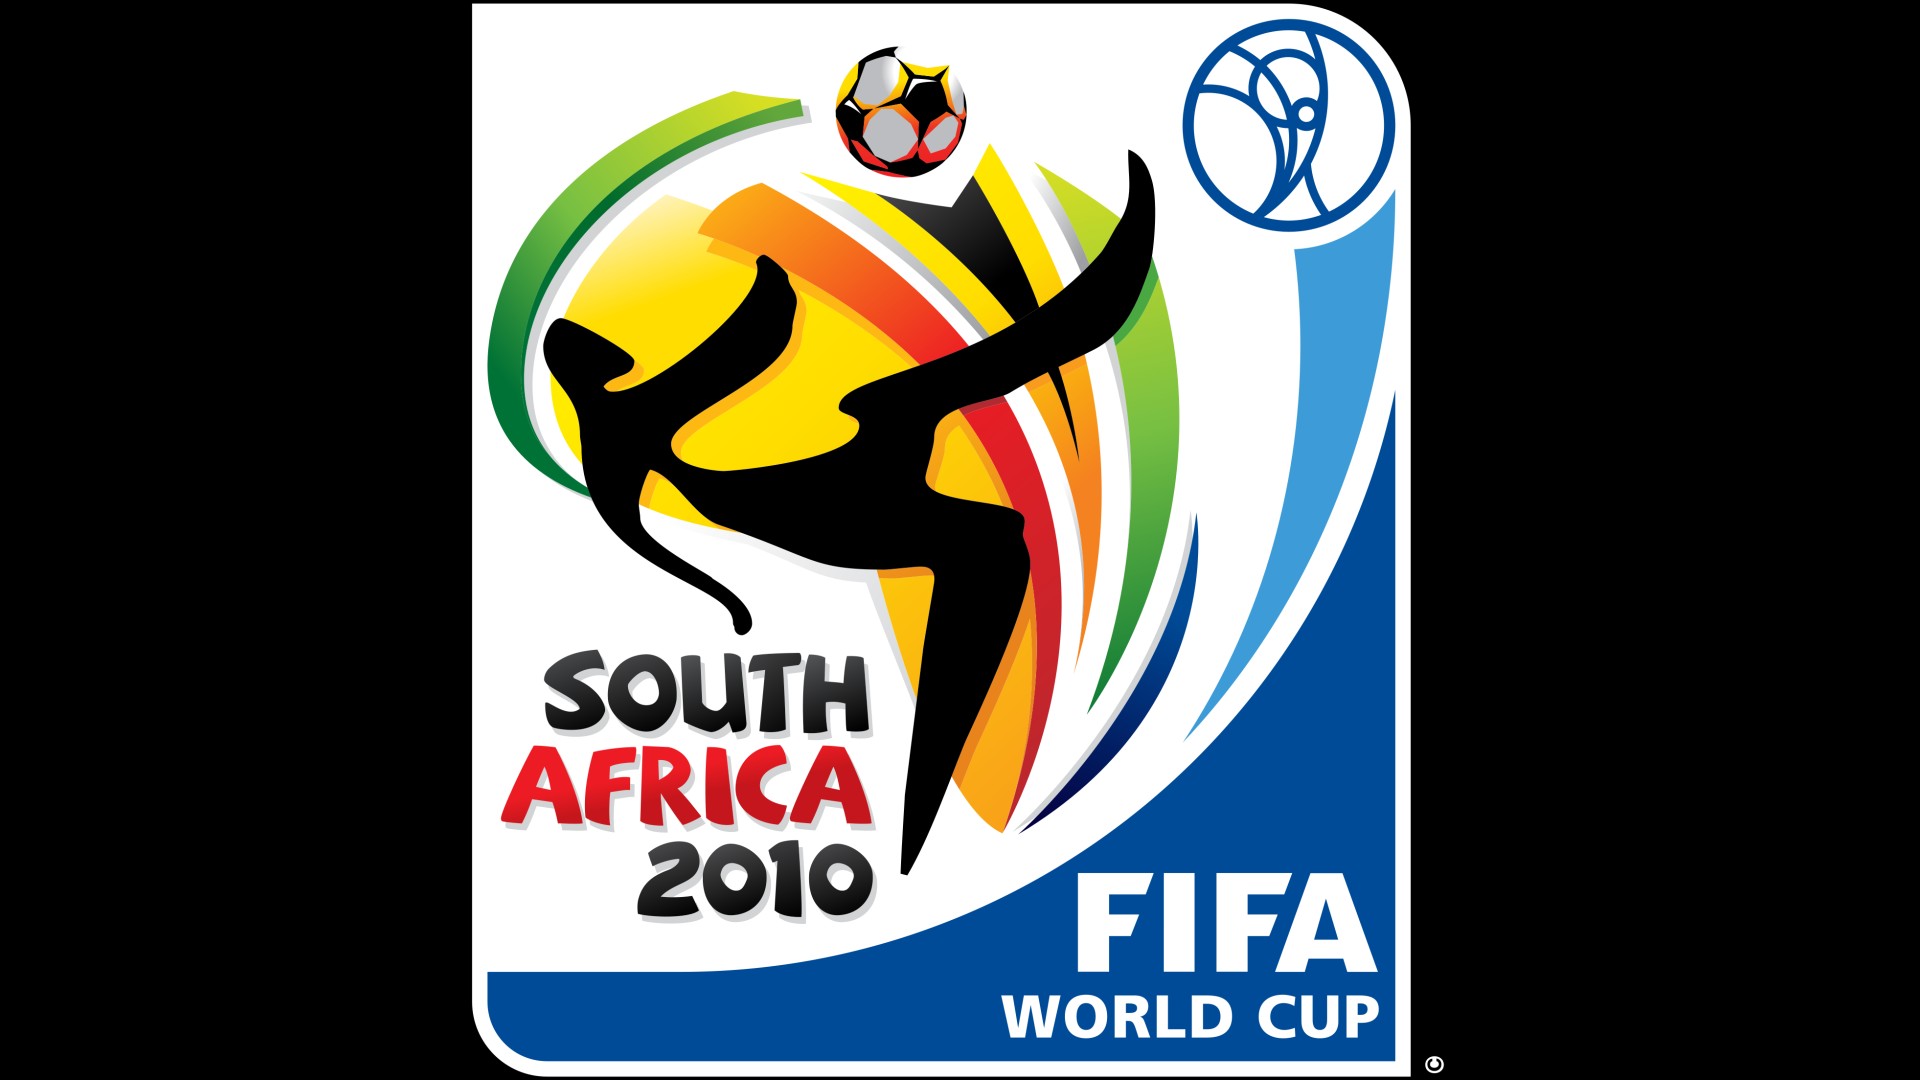 Video Game 2010 FIFA World Cup South Africa HD Wallpaper | Background Image